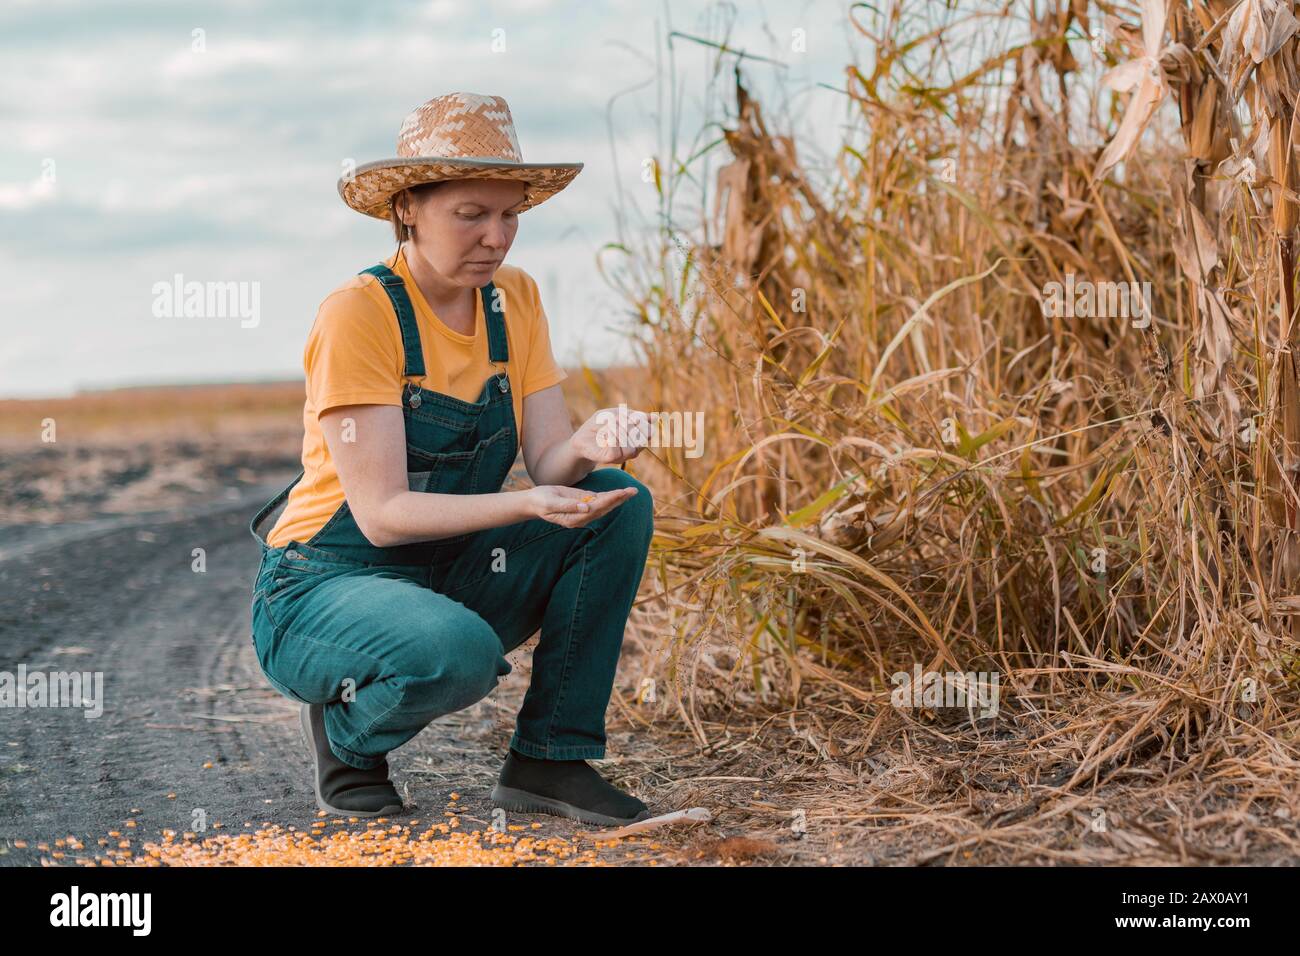 Disappointed female corn farmer in bad condition cornfield after poor harvest season of crops Stock Photo